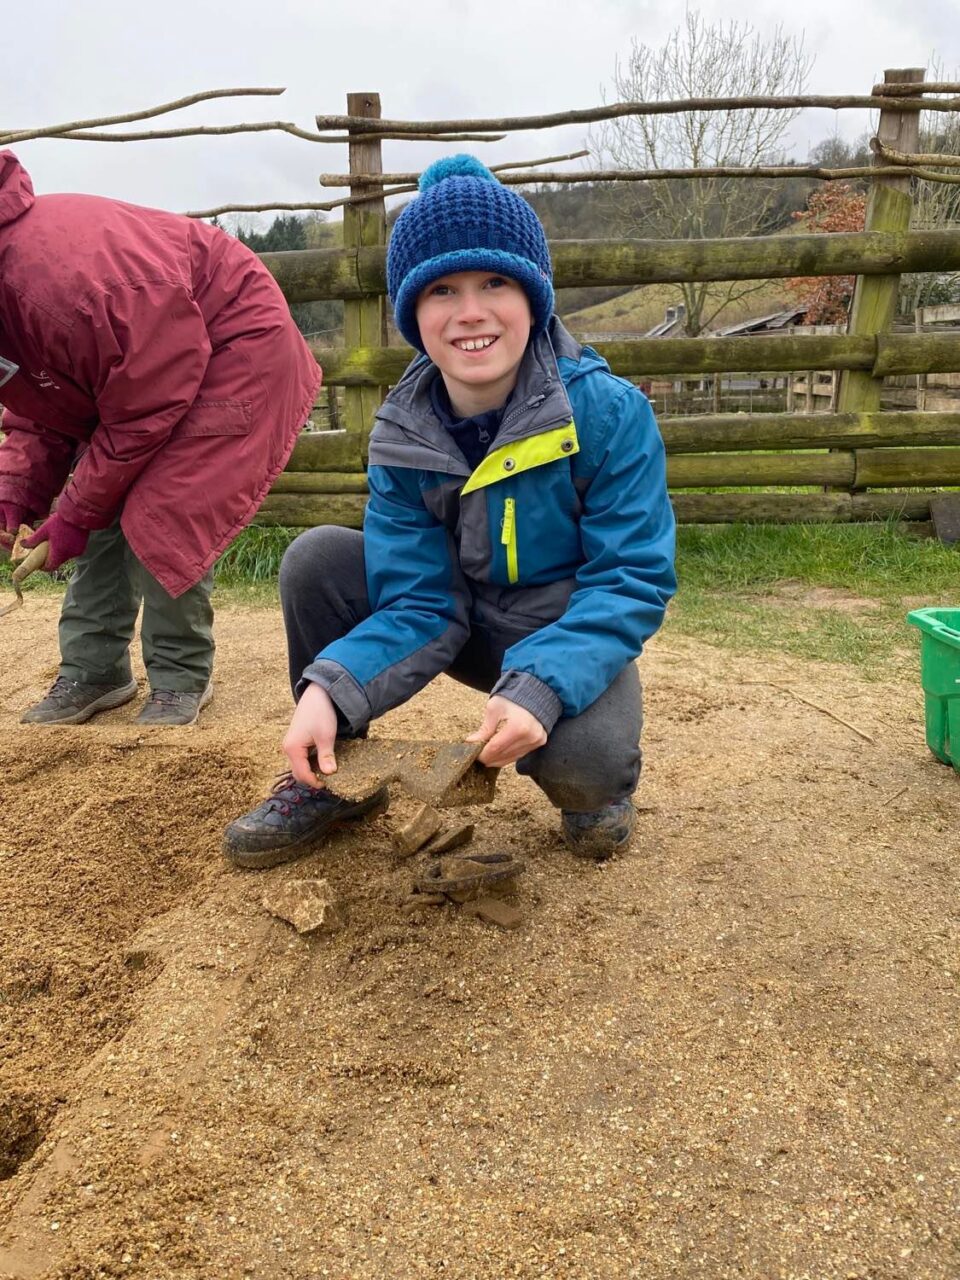 my son showing what he found in the dig